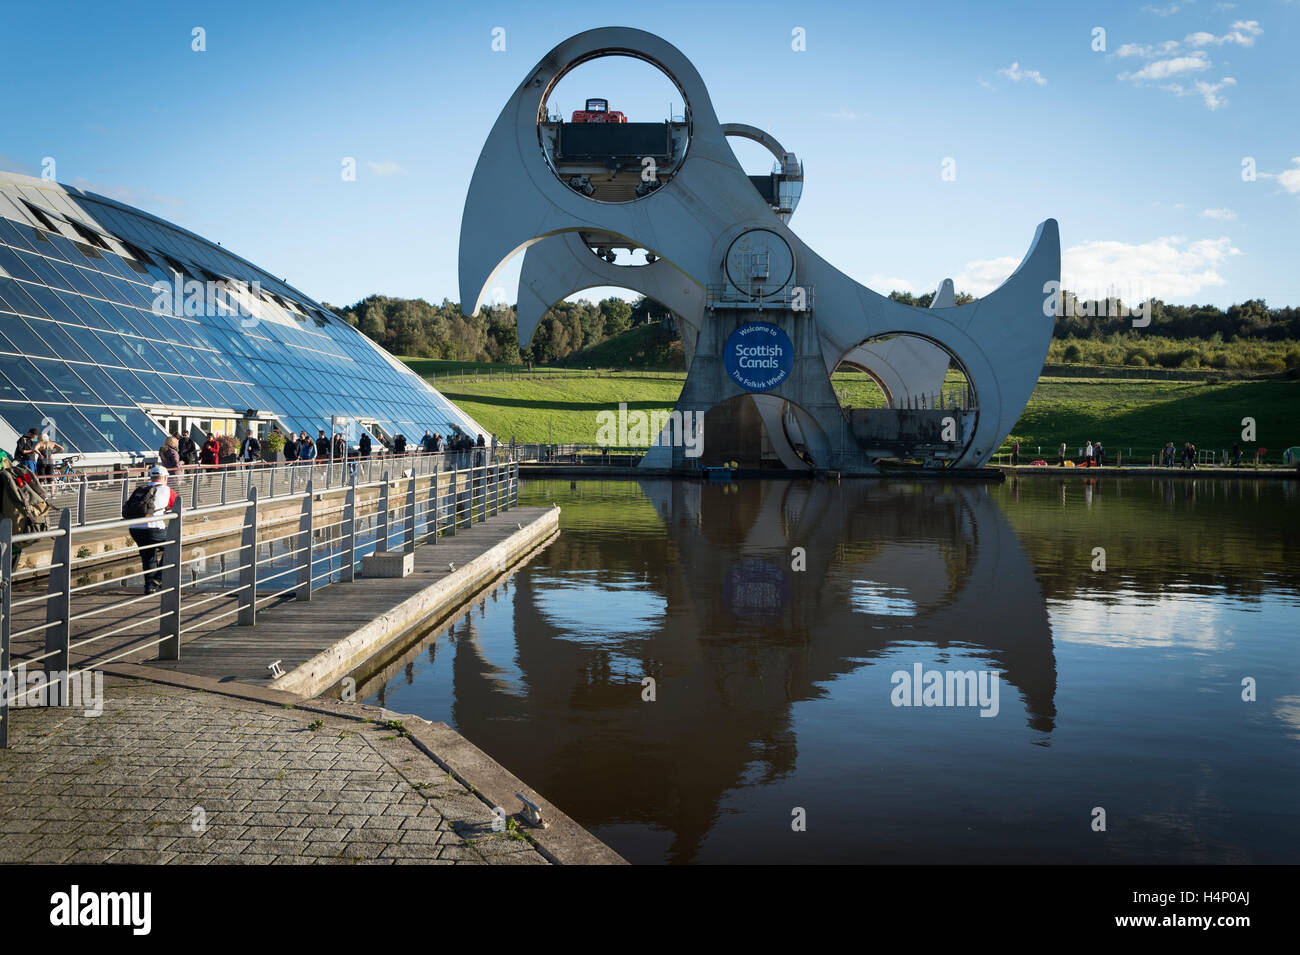 The Falkirk Wheel on the Forth and Clyde Canal, Falkirk, Stirlingshire, Scotland. Stock Photo